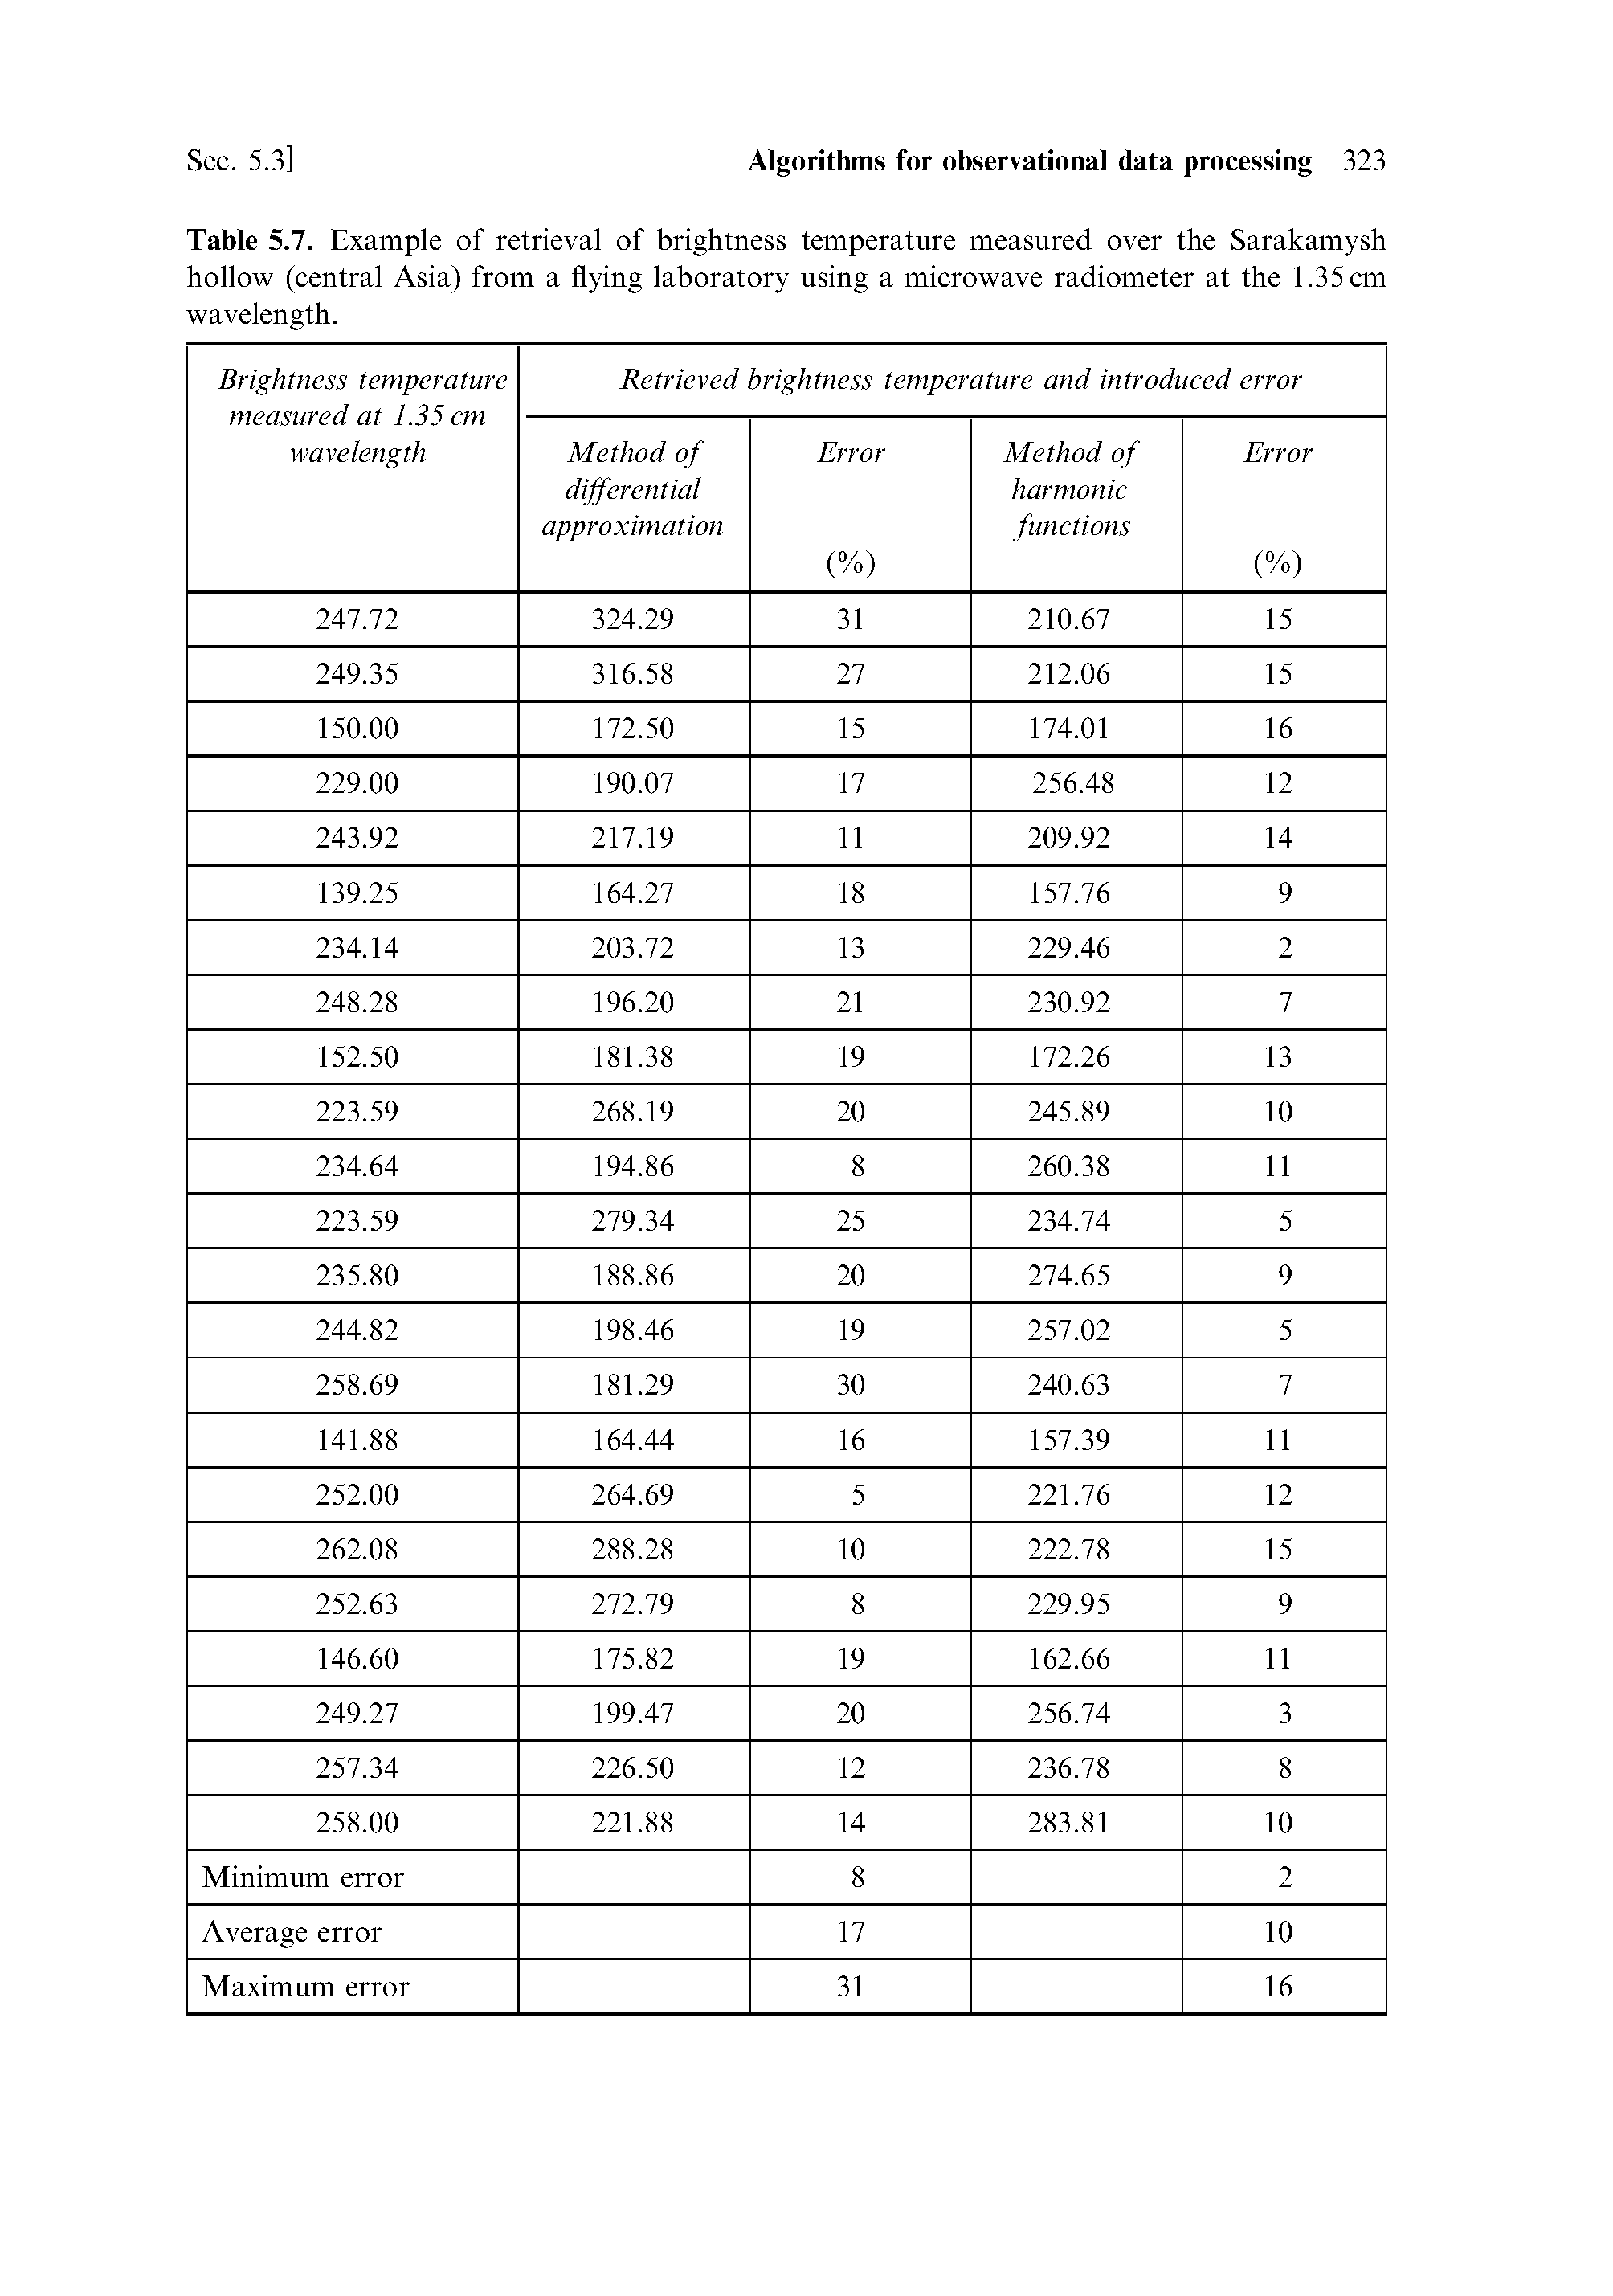 Table 5.7. Example of retrieval of brightness temperature measured over the Sarakamysh hollow (central Asia) from a flying laboratory using a microwave radiometer at the 1.35 cm wavelength.